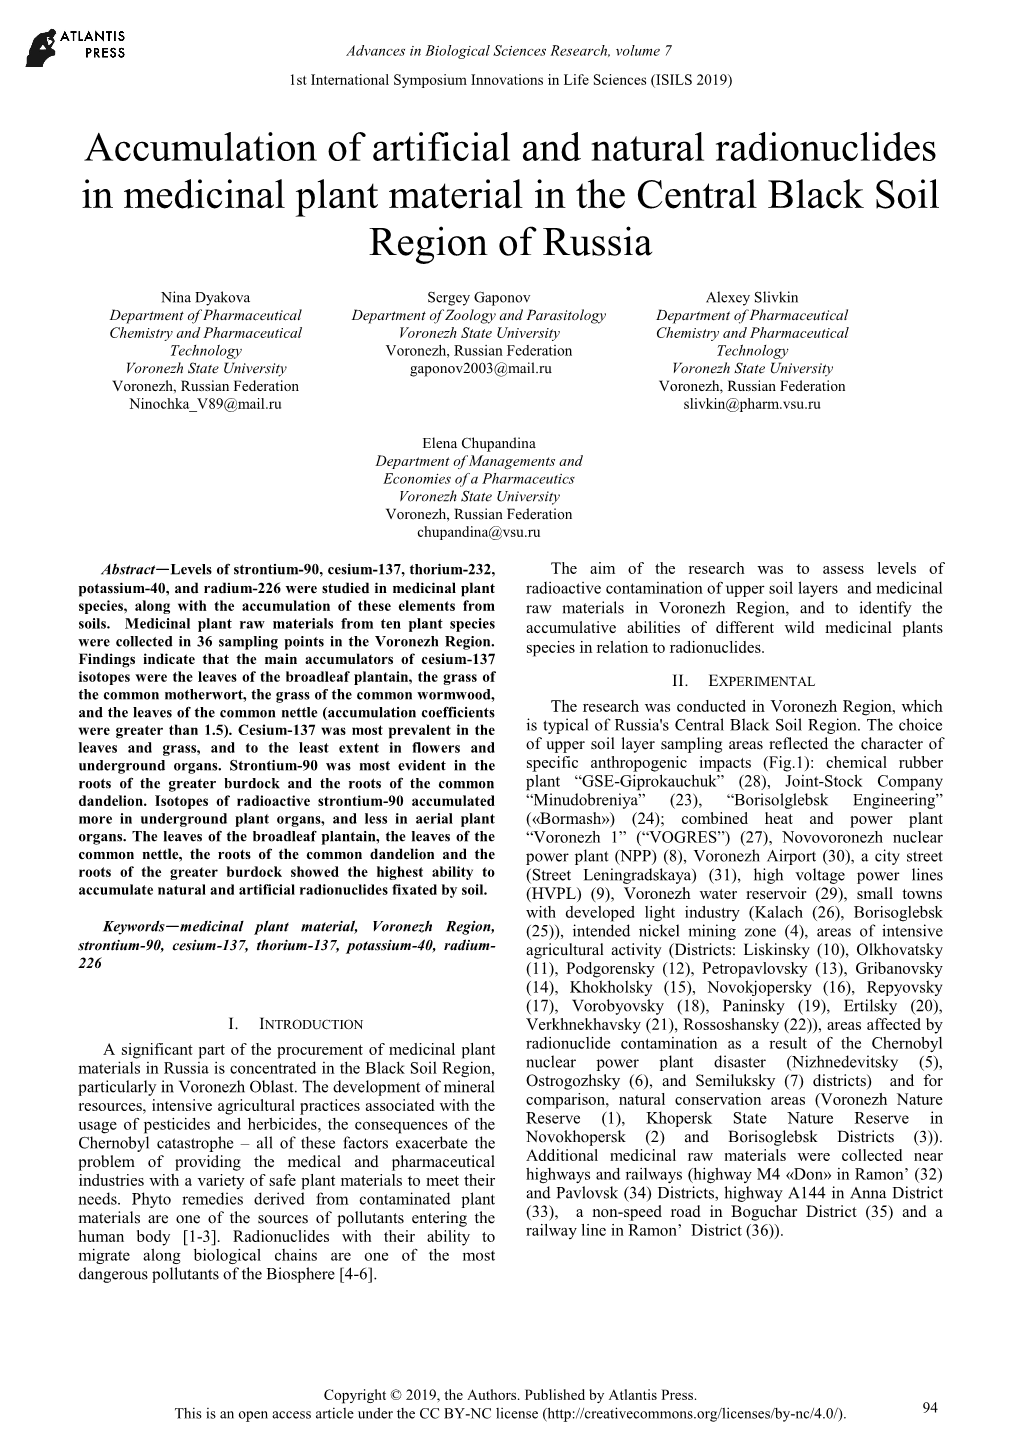 Accumulation of Artificial and Natural Radionuclides in Medicinal Plant Material in the Central Black Soil Region of Russia